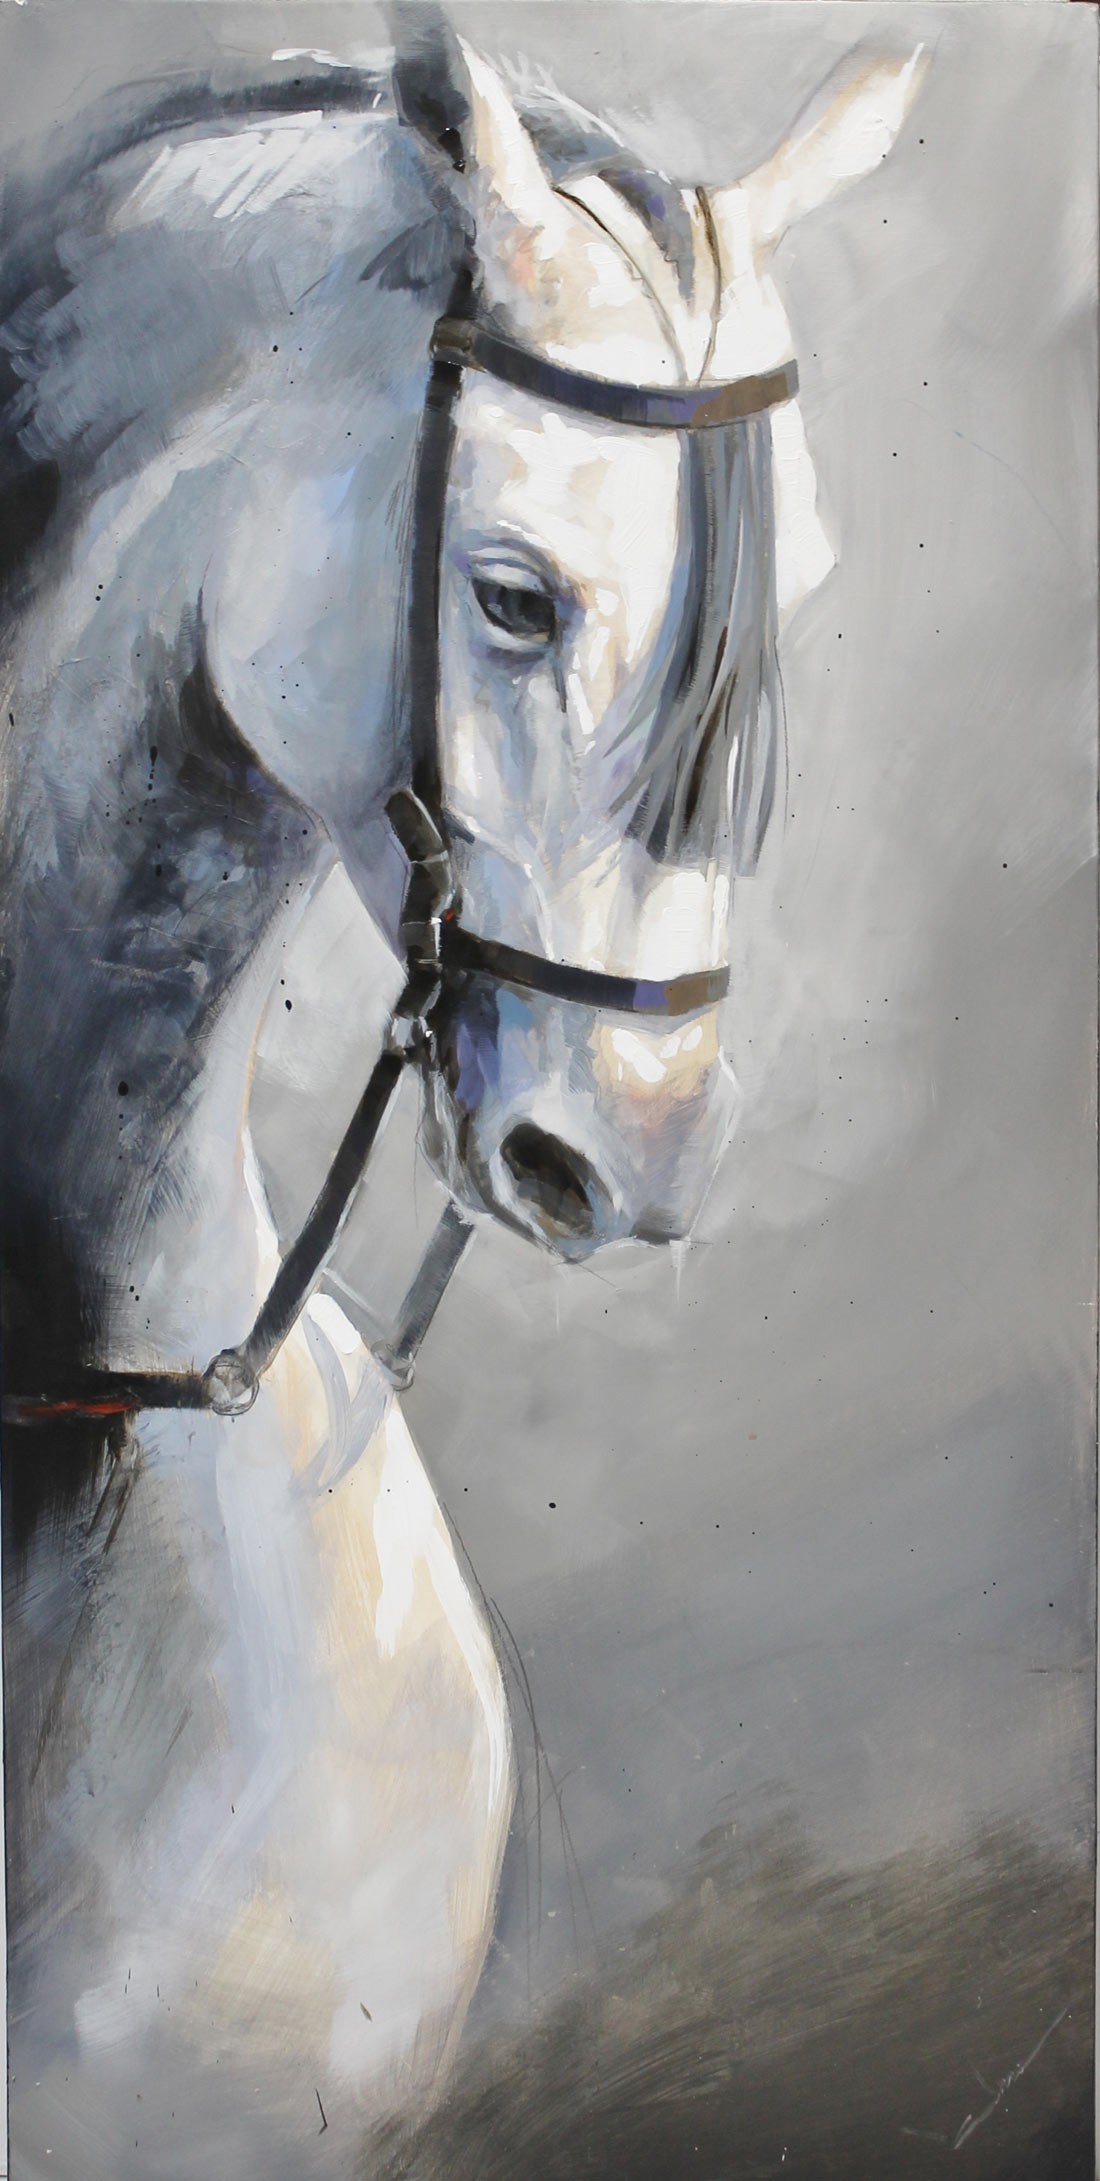 Abraham Pinto: The look of the horse